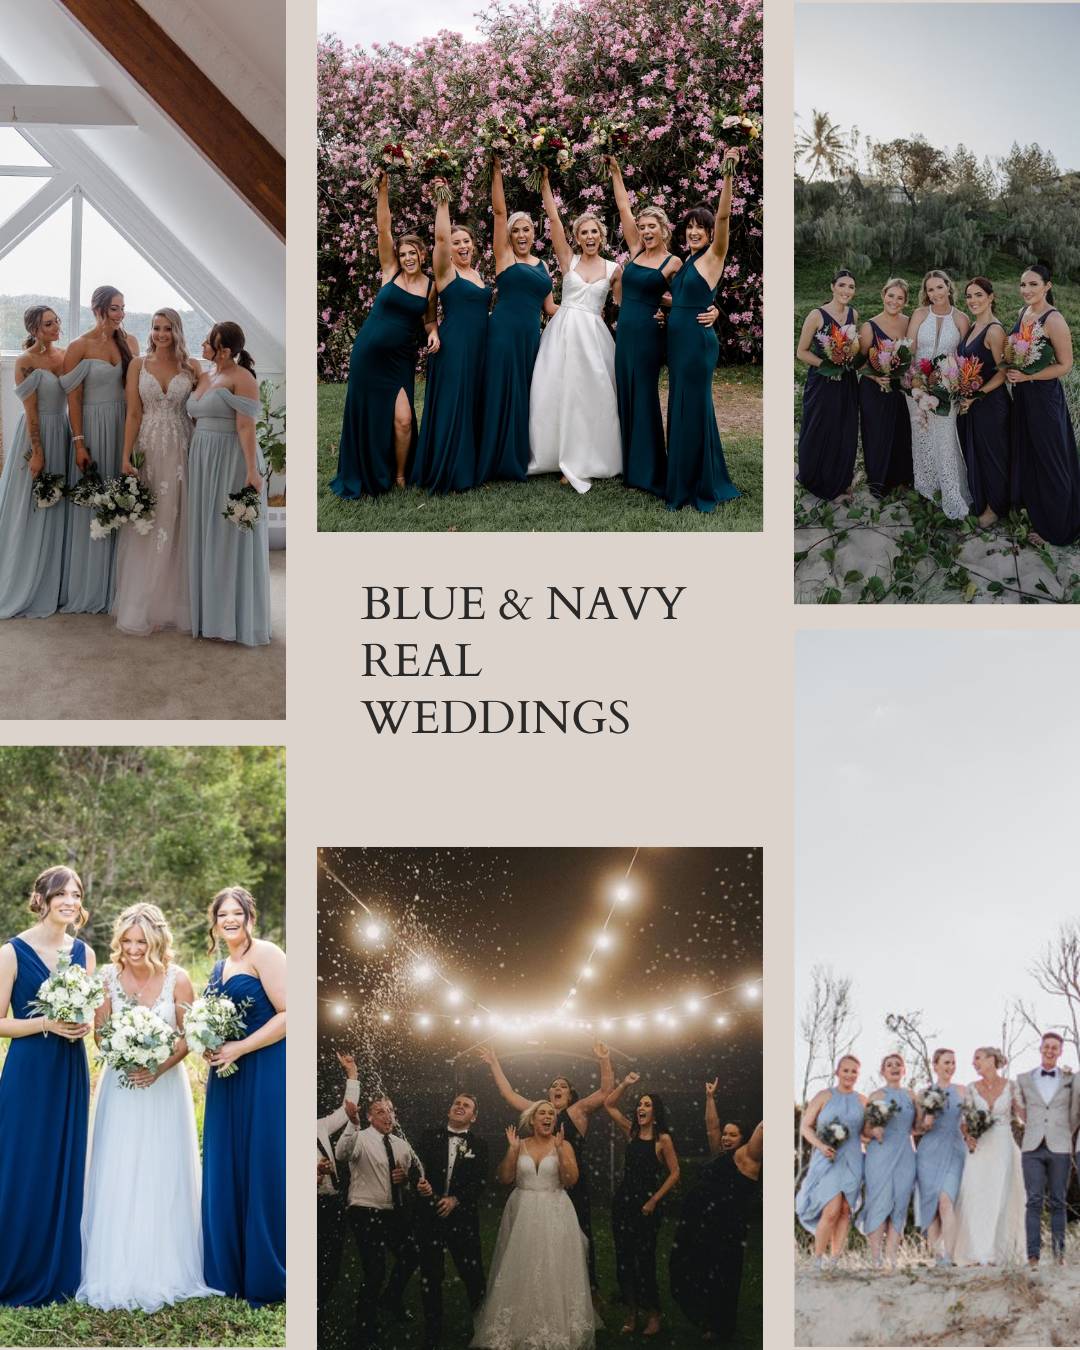 real wedding inspiration for blue and navy bridesmaid dresses in Australia